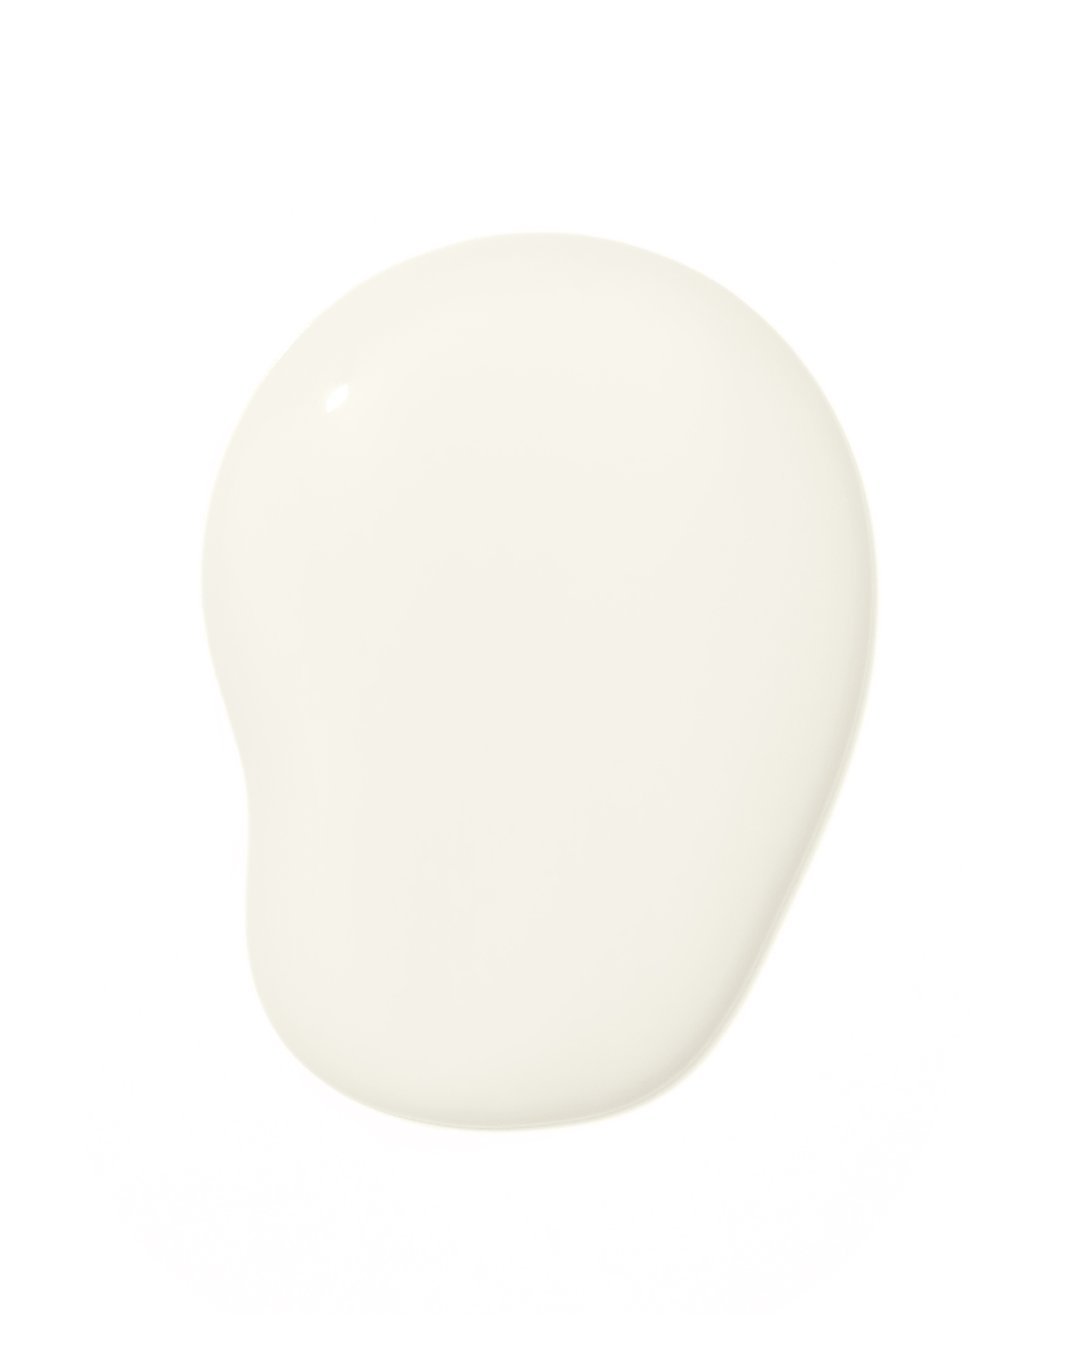 Clare Paint, Timeless, Wall Paint Eggshell, Gallon - Image 0